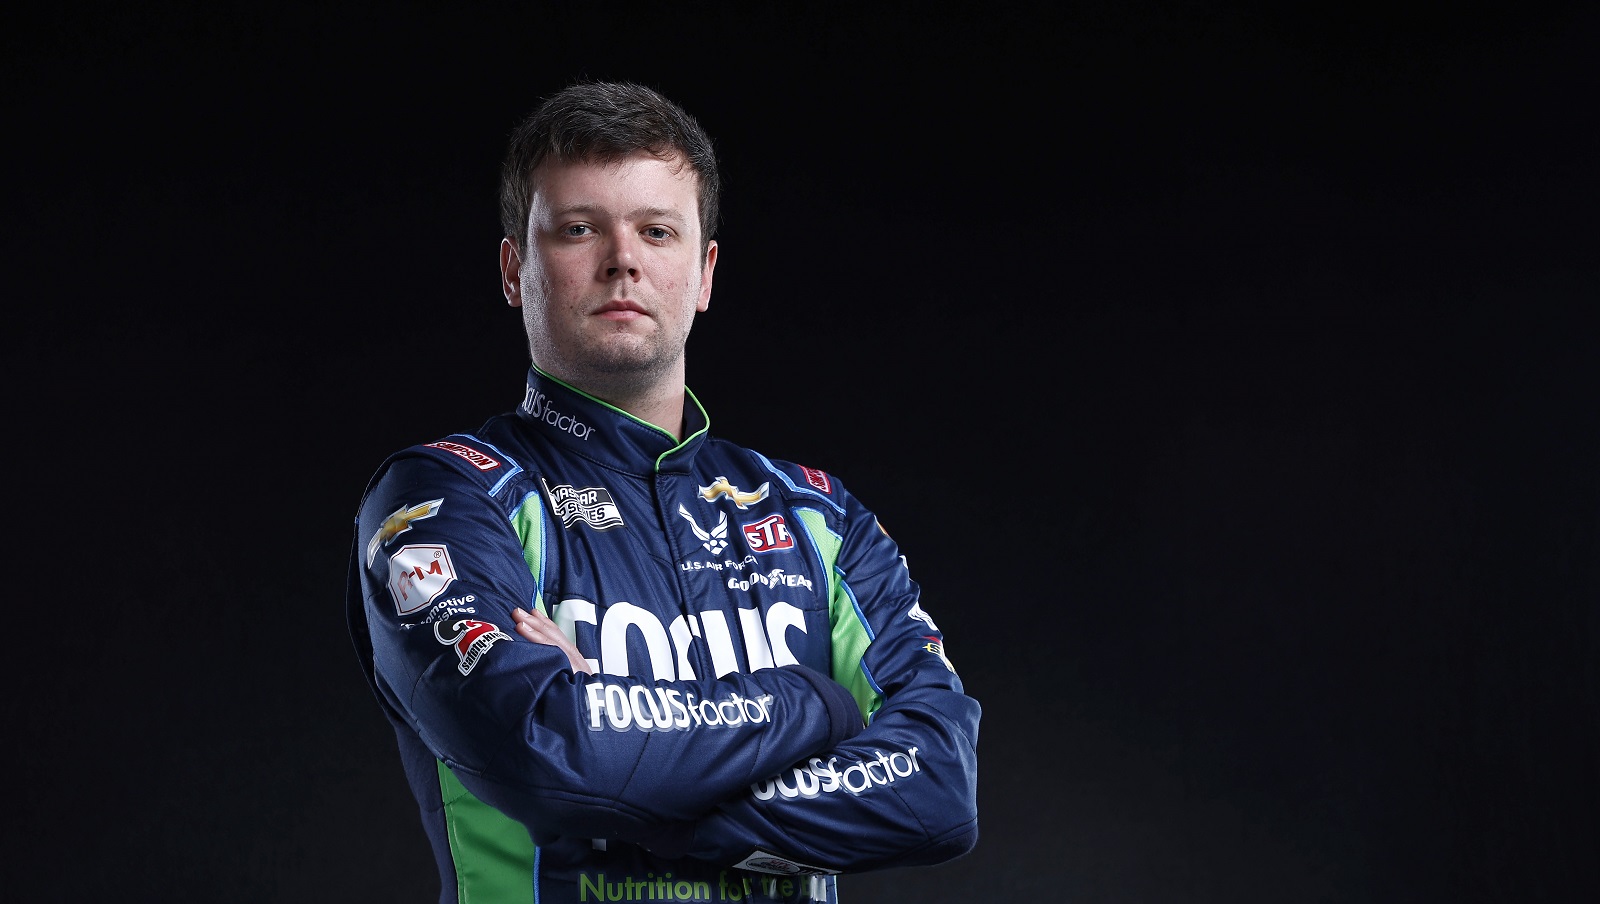 Erik Jones poses for a photo during NASCAR Production Days at Clutch Studios on Jan. 19, 2022, in Concord, North Carolina.